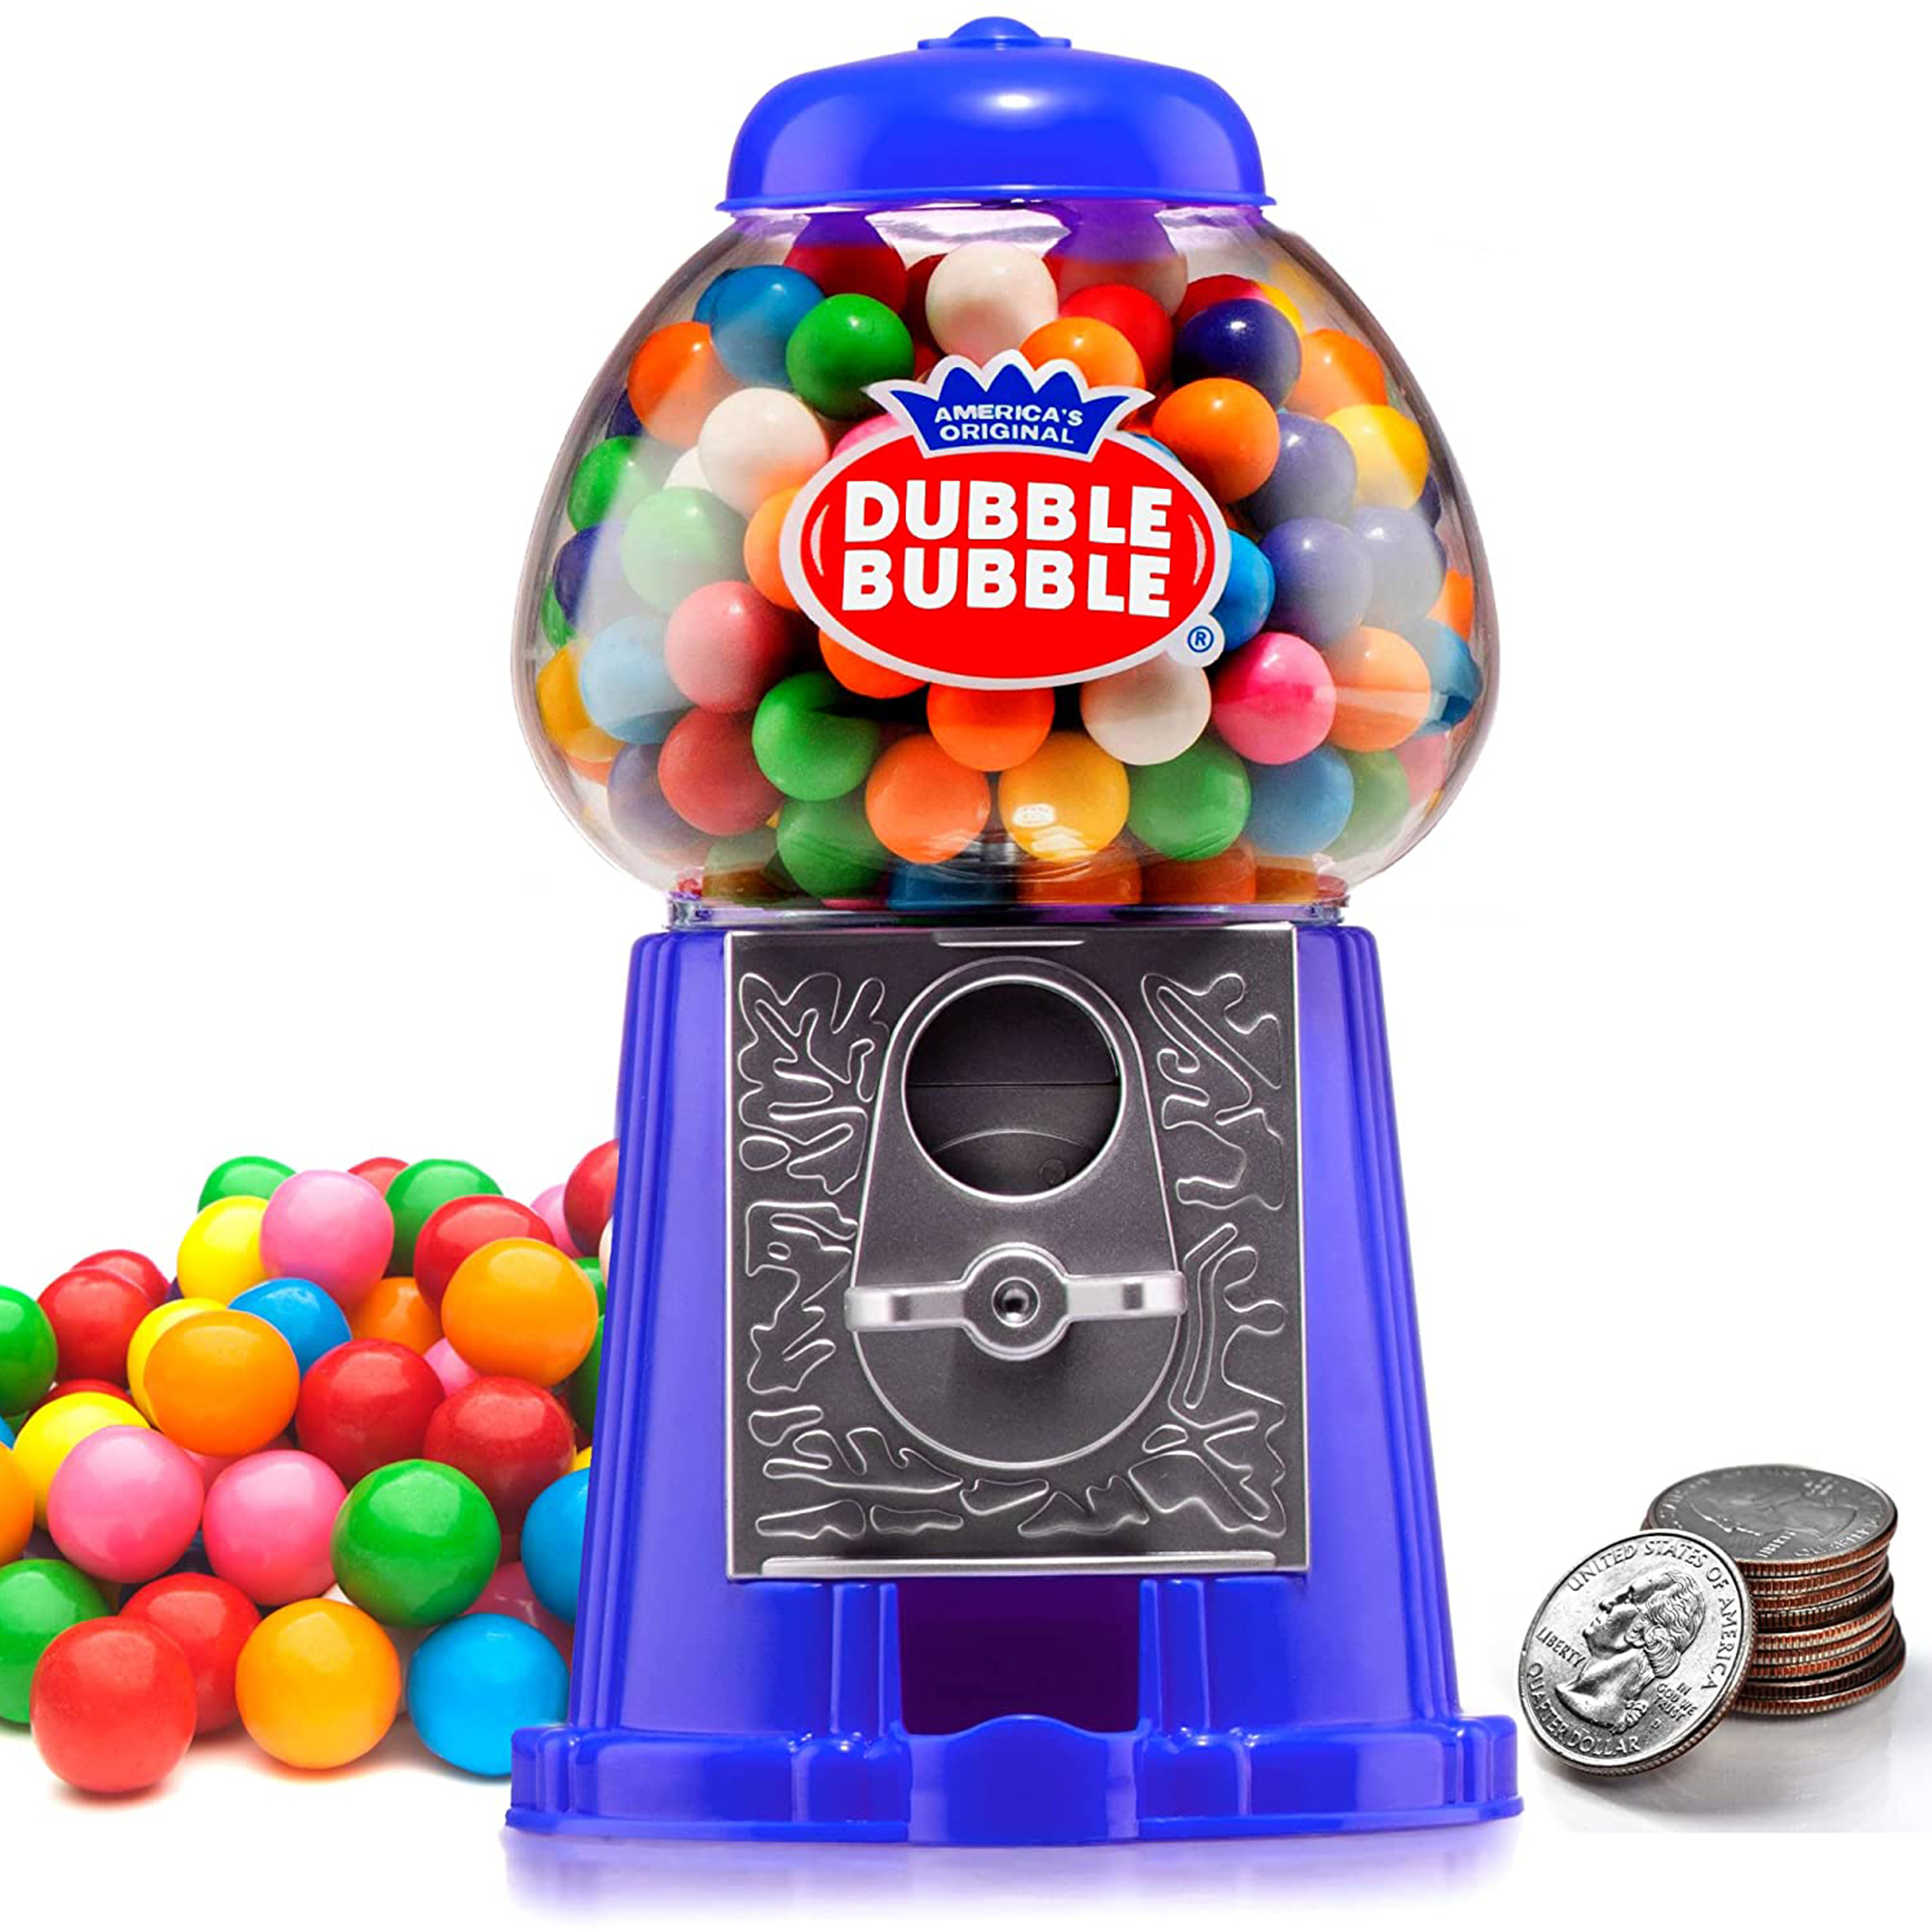 Playo Coin-Operated 8.5” Gumball Machine For Kids with 45 Pcs Bubble Gum,  Blue